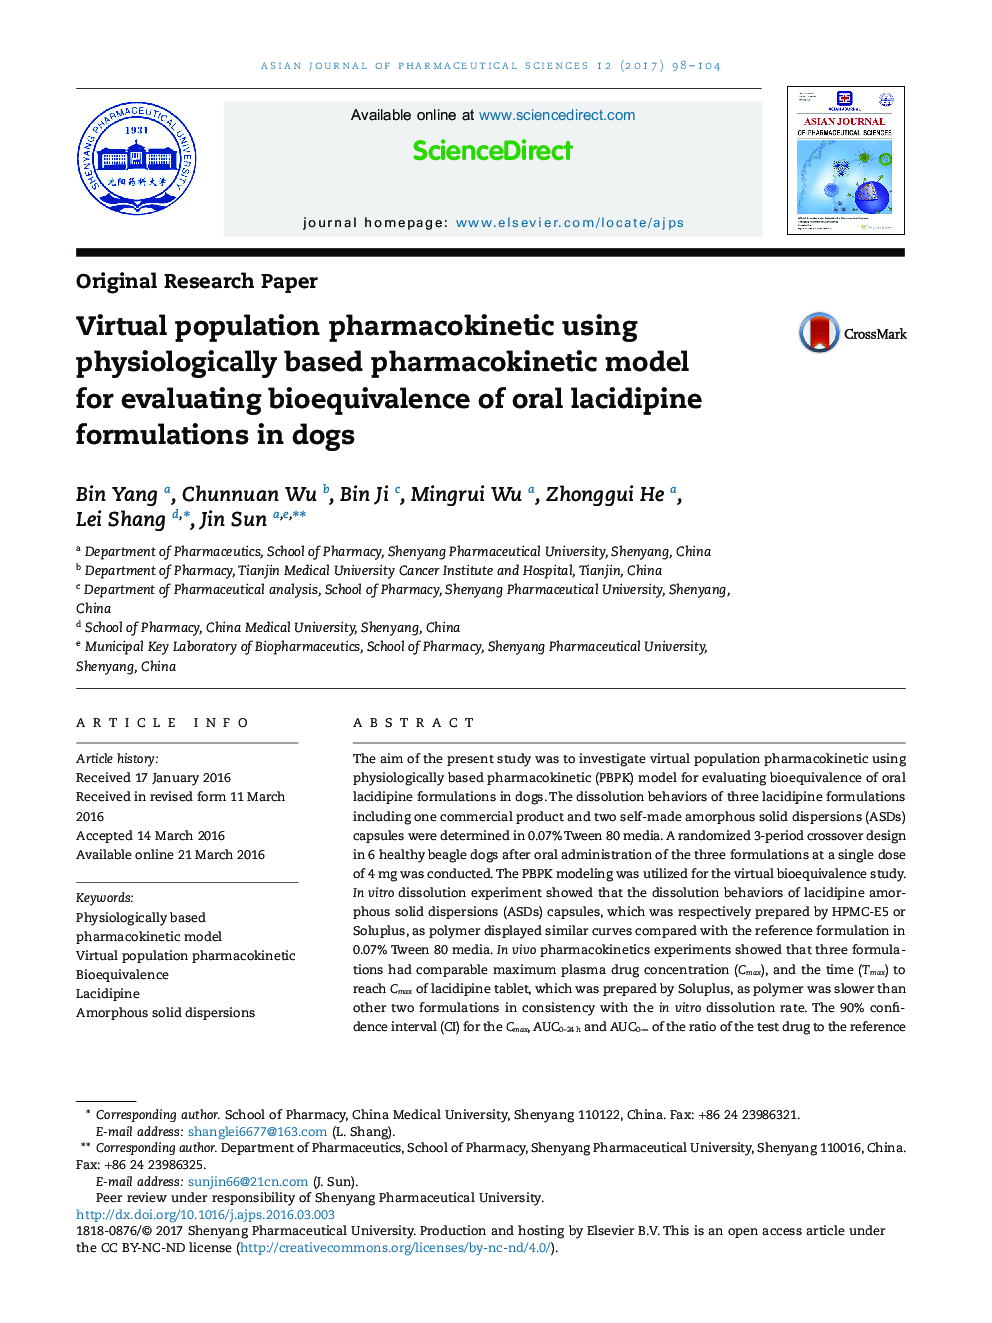 Virtual population pharmacokinetic using physiologically based pharmacokinetic model for evaluating bioequivalence of oral lacidipine formulations in dogs